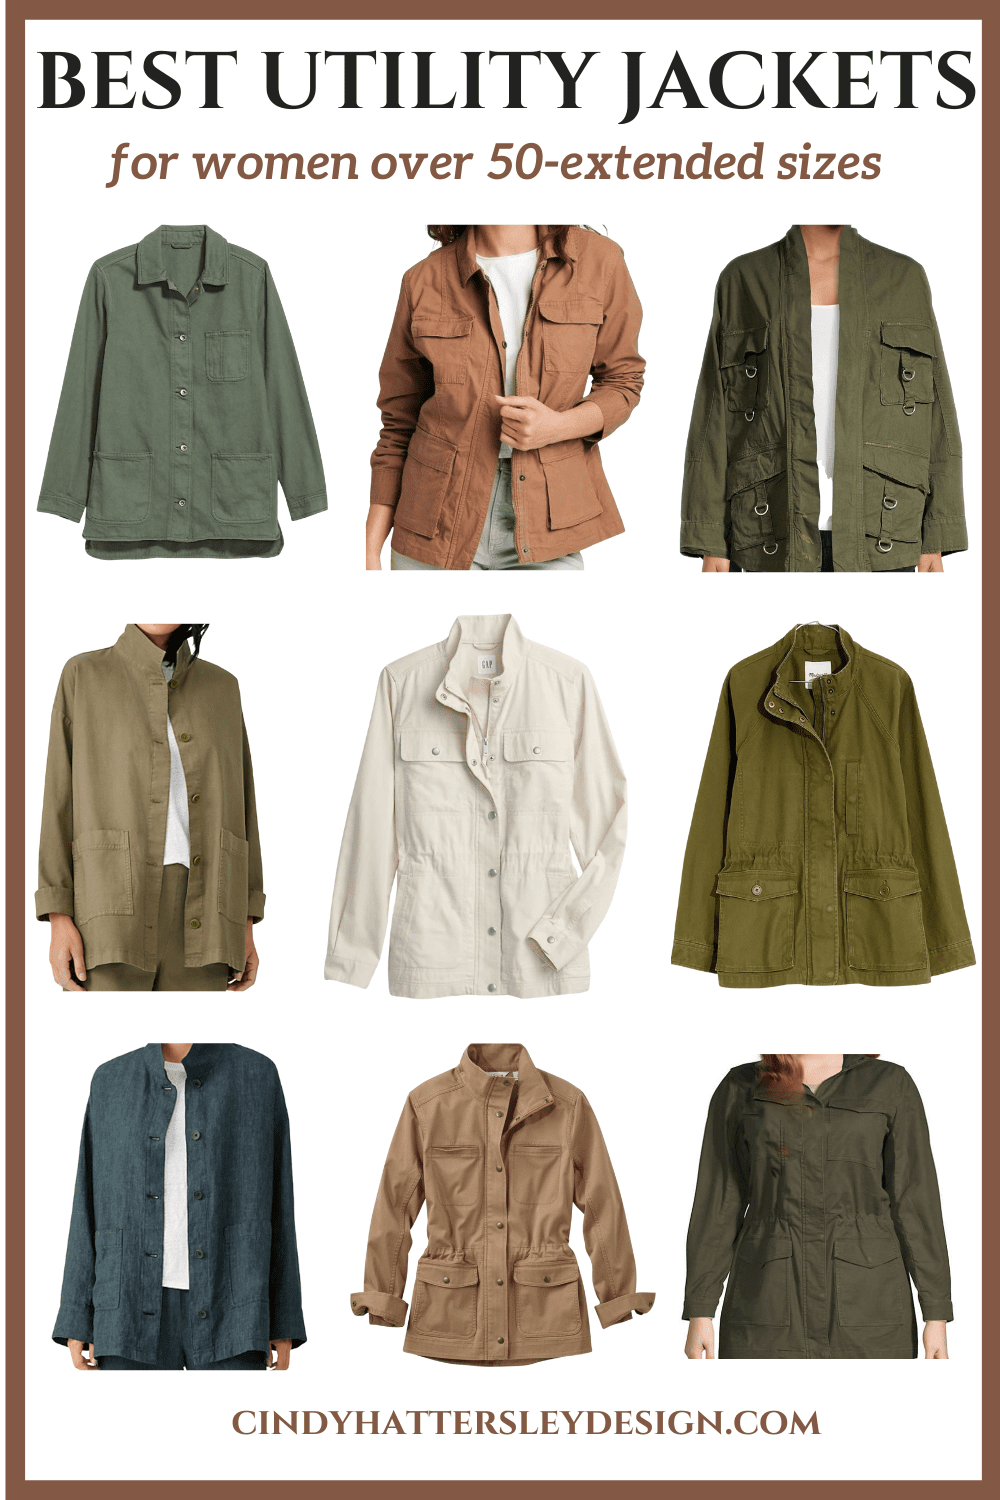 best utility jackets for women over 50 extended sizes